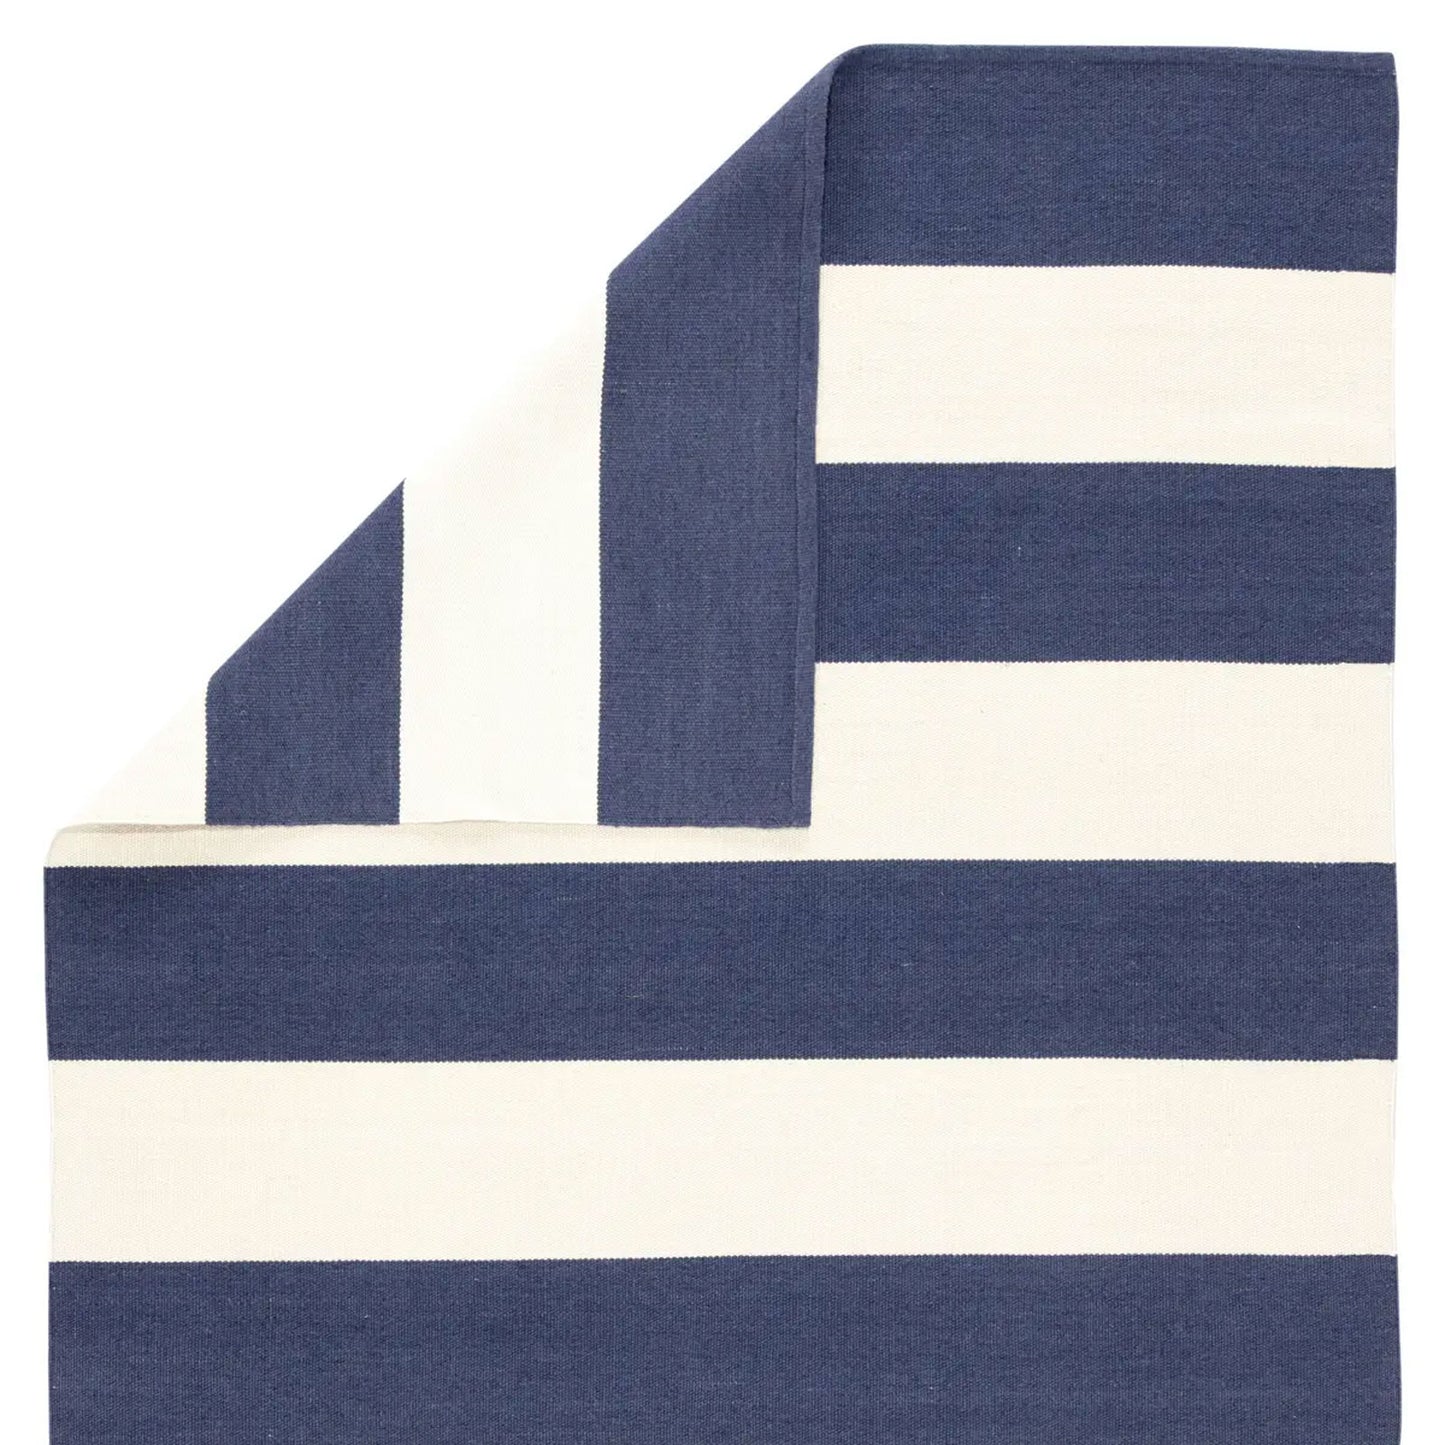 Lanai Remora Indoor/Outdoor Rug in Deep Blue and Ivory (Multiple Sizes)